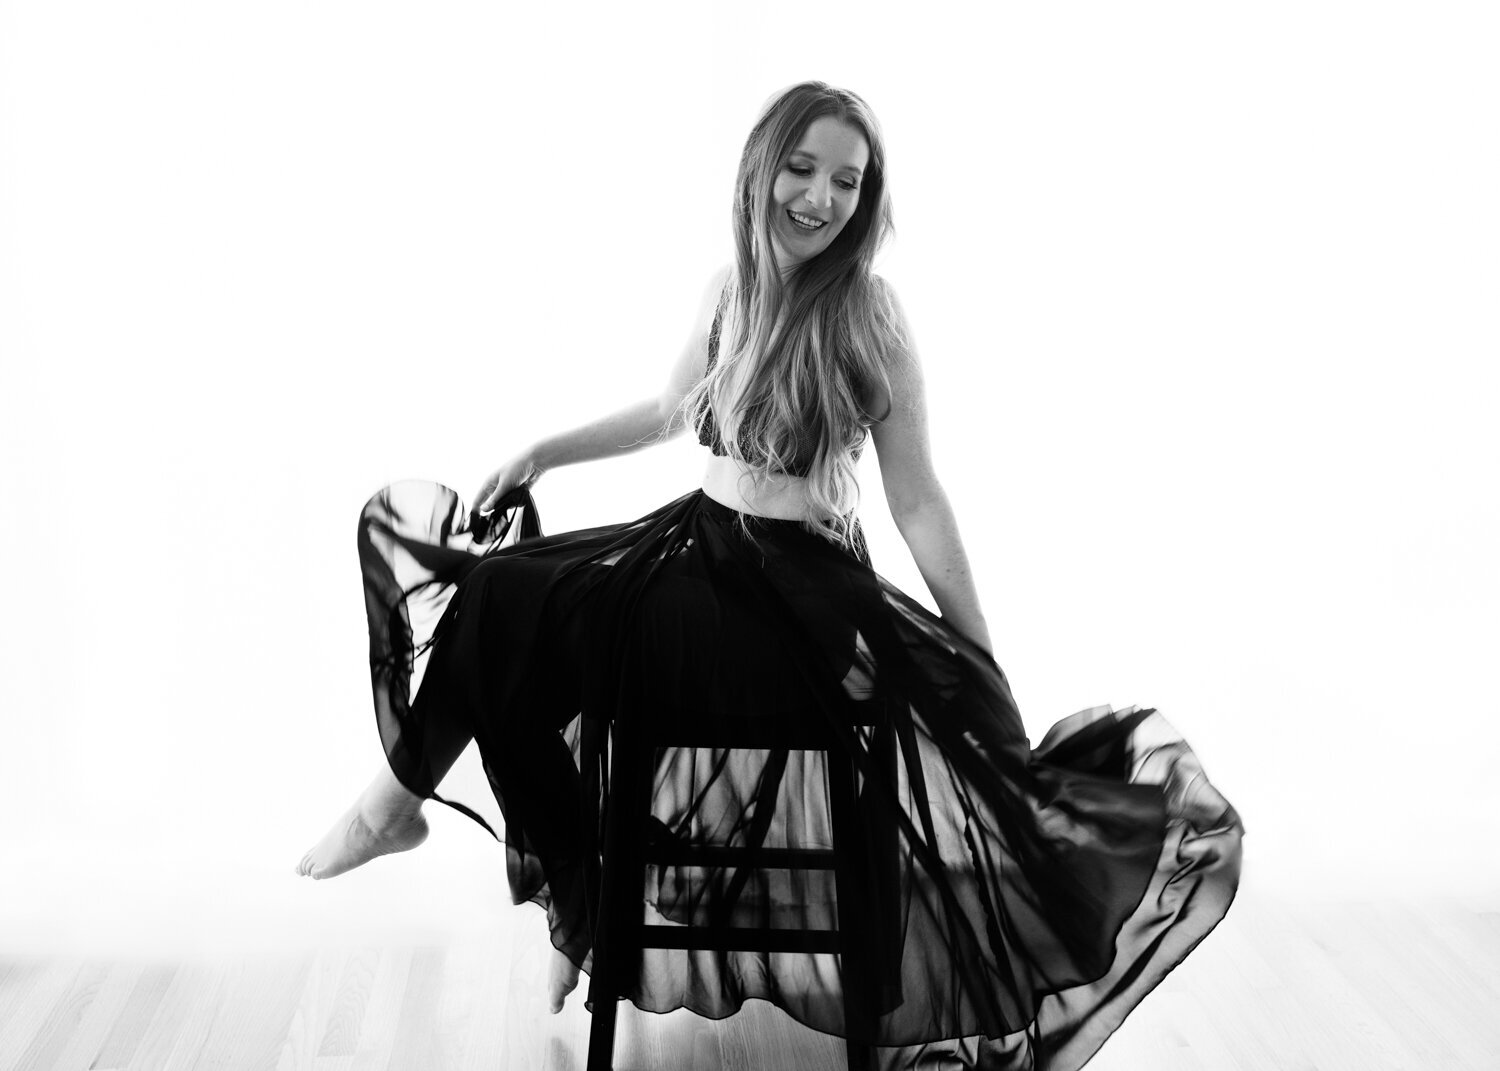 Black and white image of a woman in a San Francisco boudoir studio, caught in a moment of carefree motion. She's wearing a black flowing skirt that flares out as she twirls, paired with a delicate black top. Her long hair sways with the movement, her smile radiating happiness.